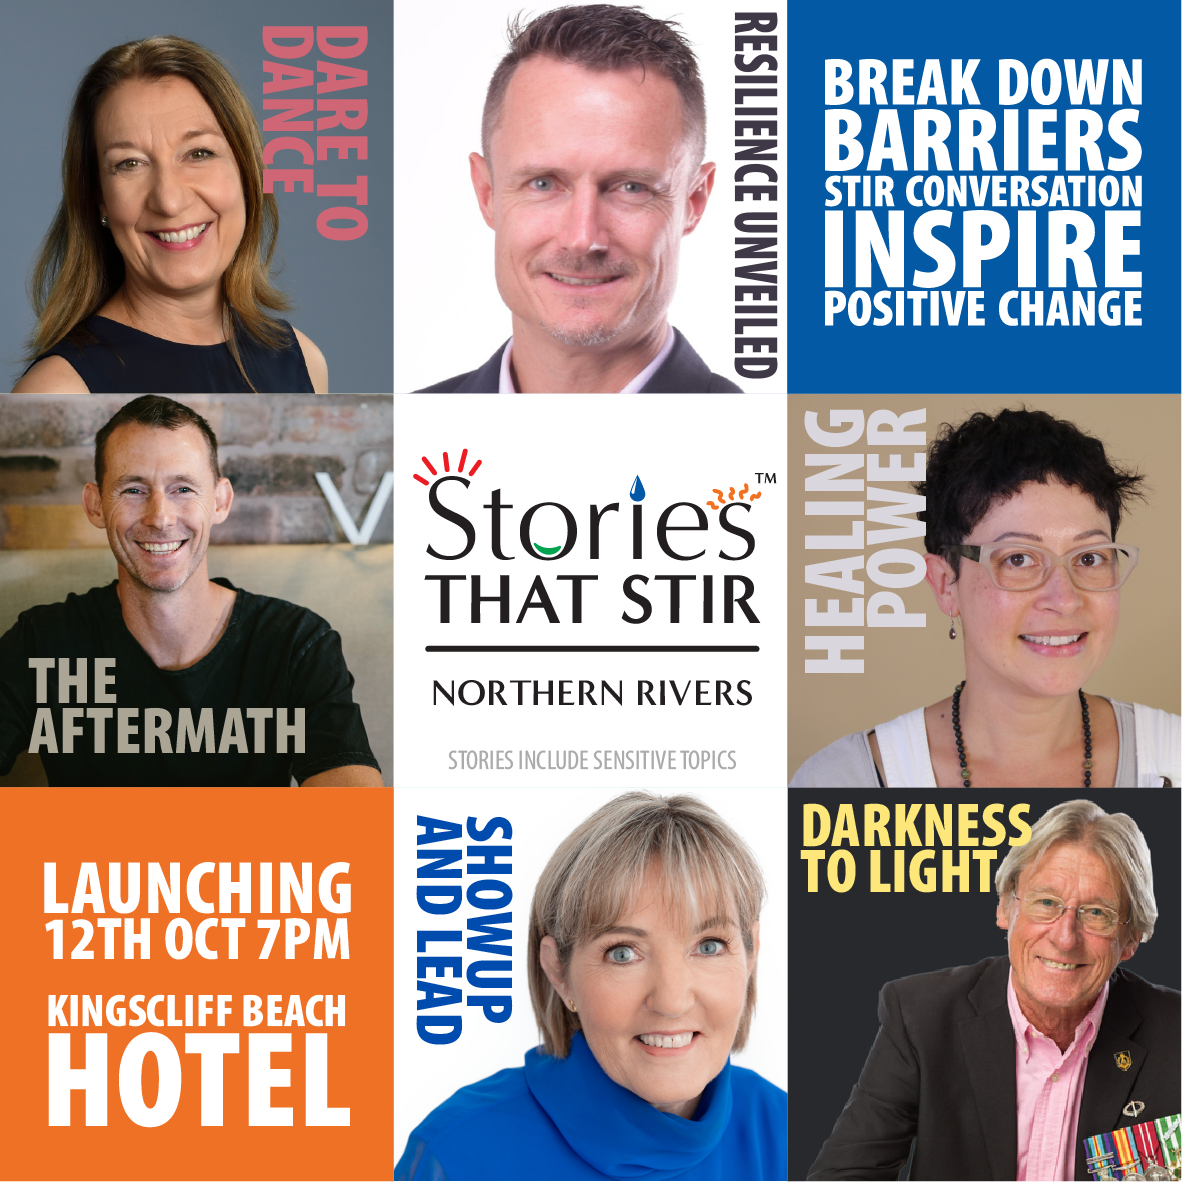 Stories that stir northern rivers launches 12 October 2023 in Kingscliff, Northern NSW